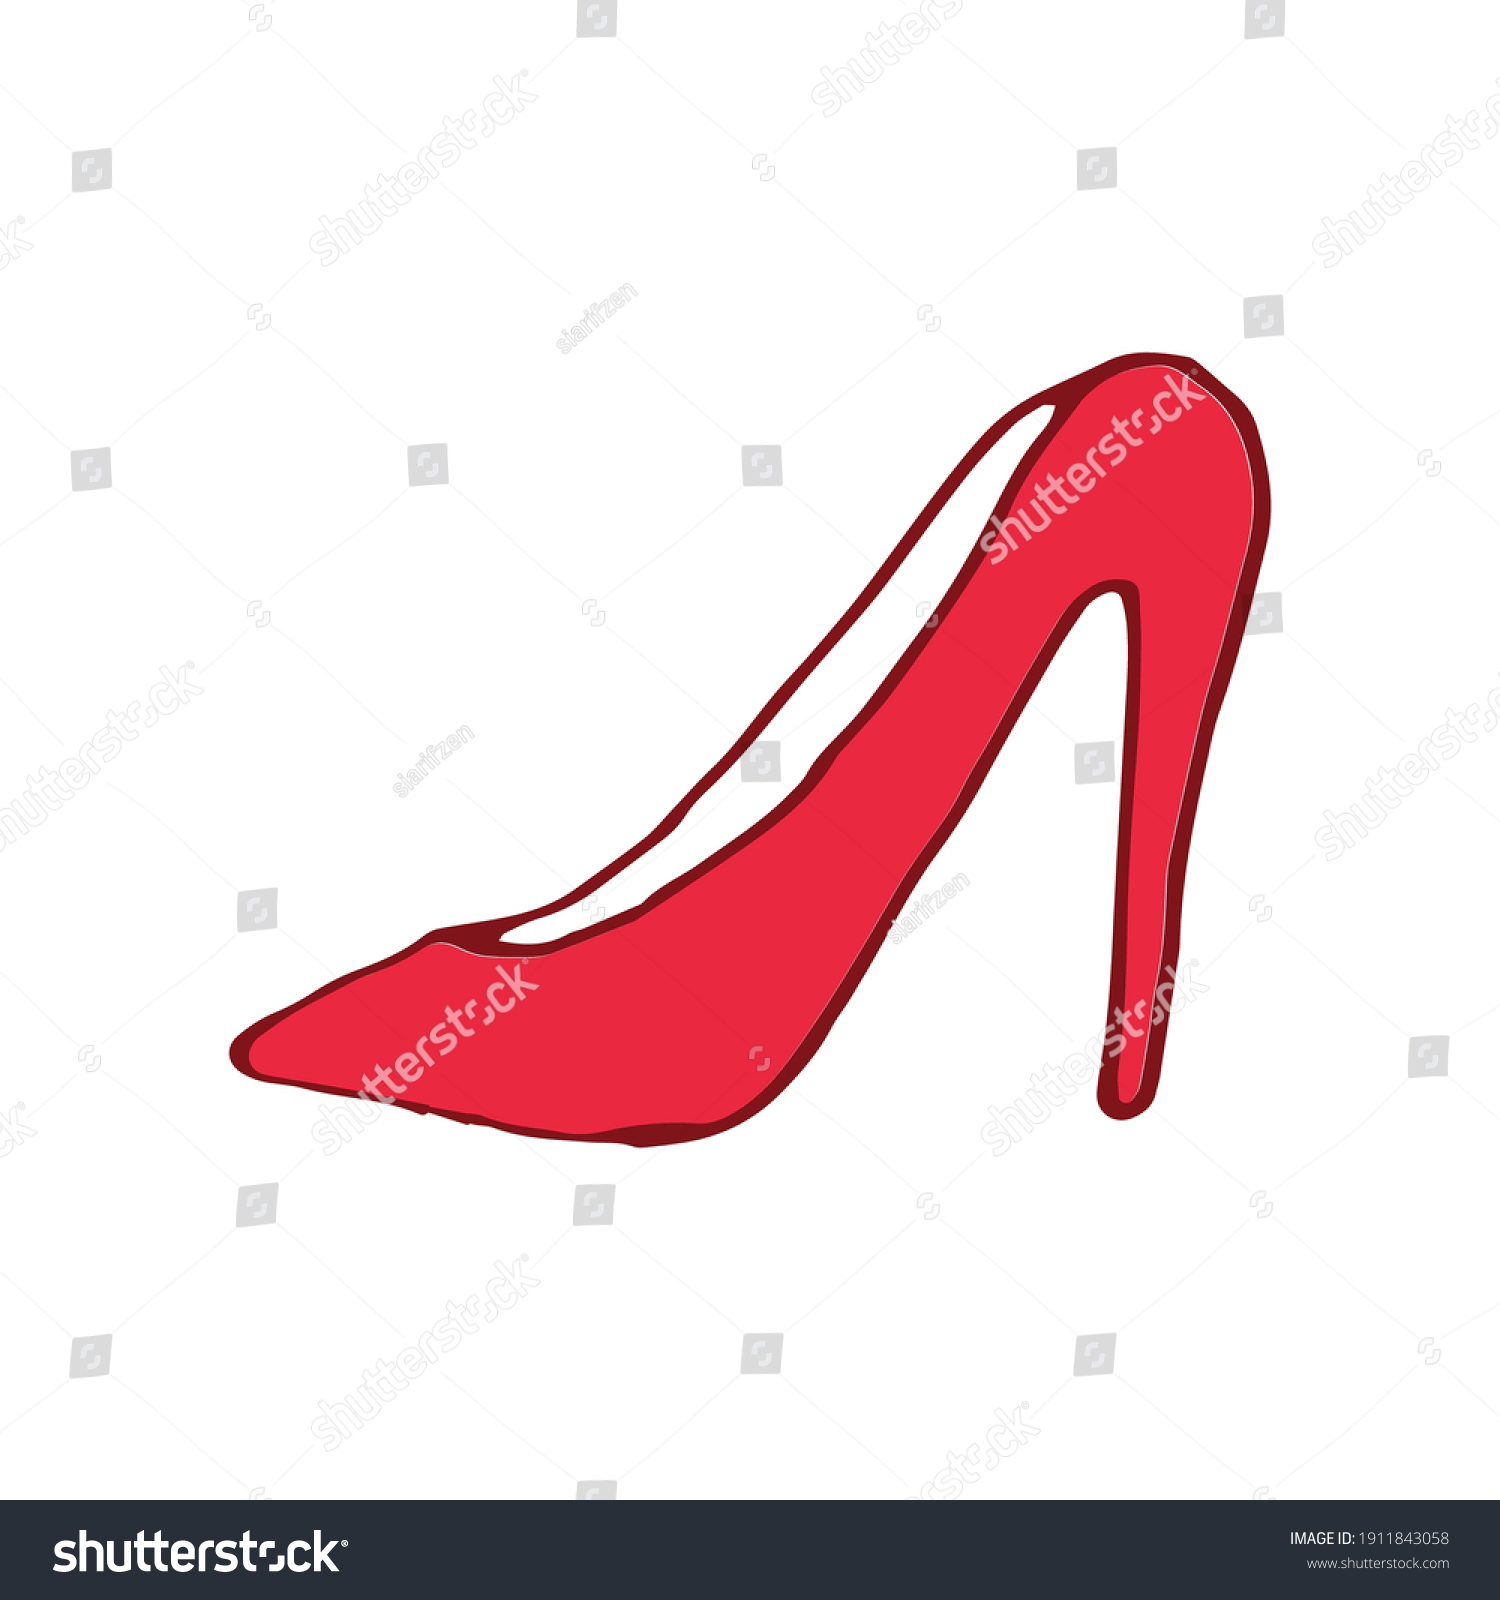 Red High Heel Shoe Vector Illustration Stock Vector (Royalty Free ...